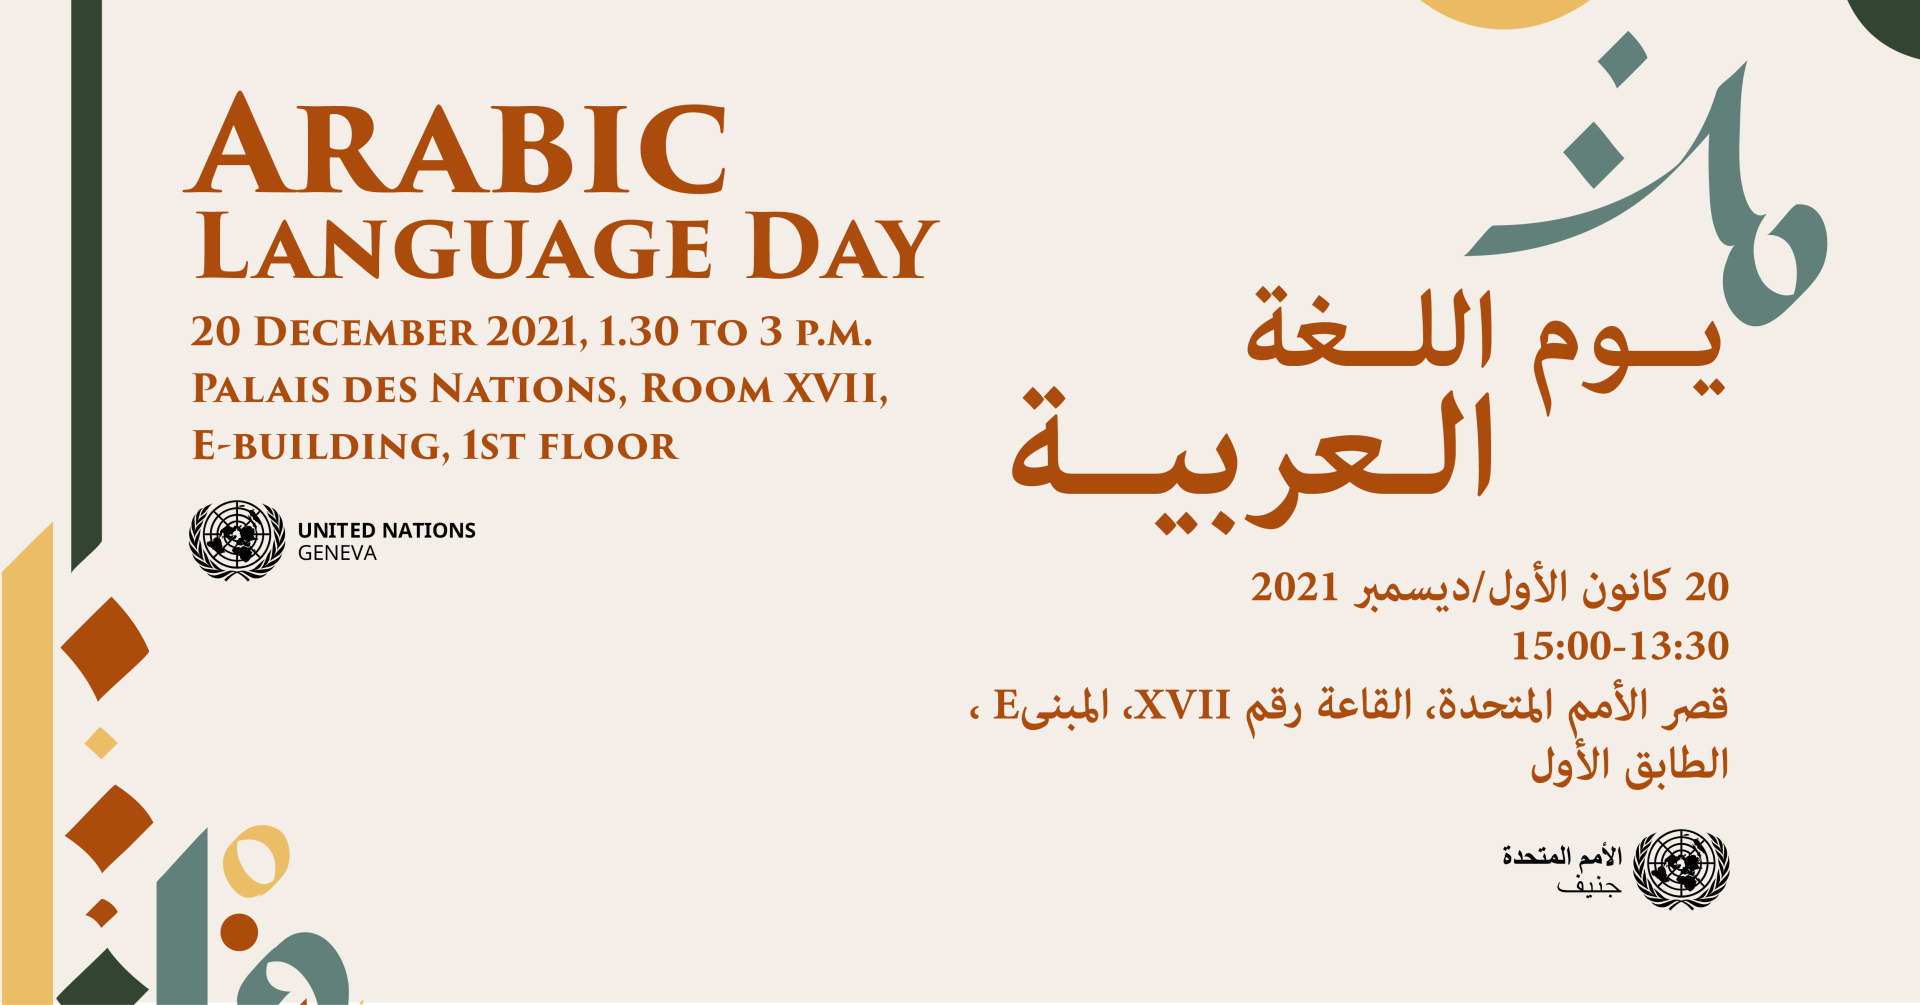 Banner for Arabic Language Day. The text reads: Arabic Language Day, 20 December 2021, 1:30 to 3pm, Palais des Nations, Room XVII, E-Building, 1st Floor.